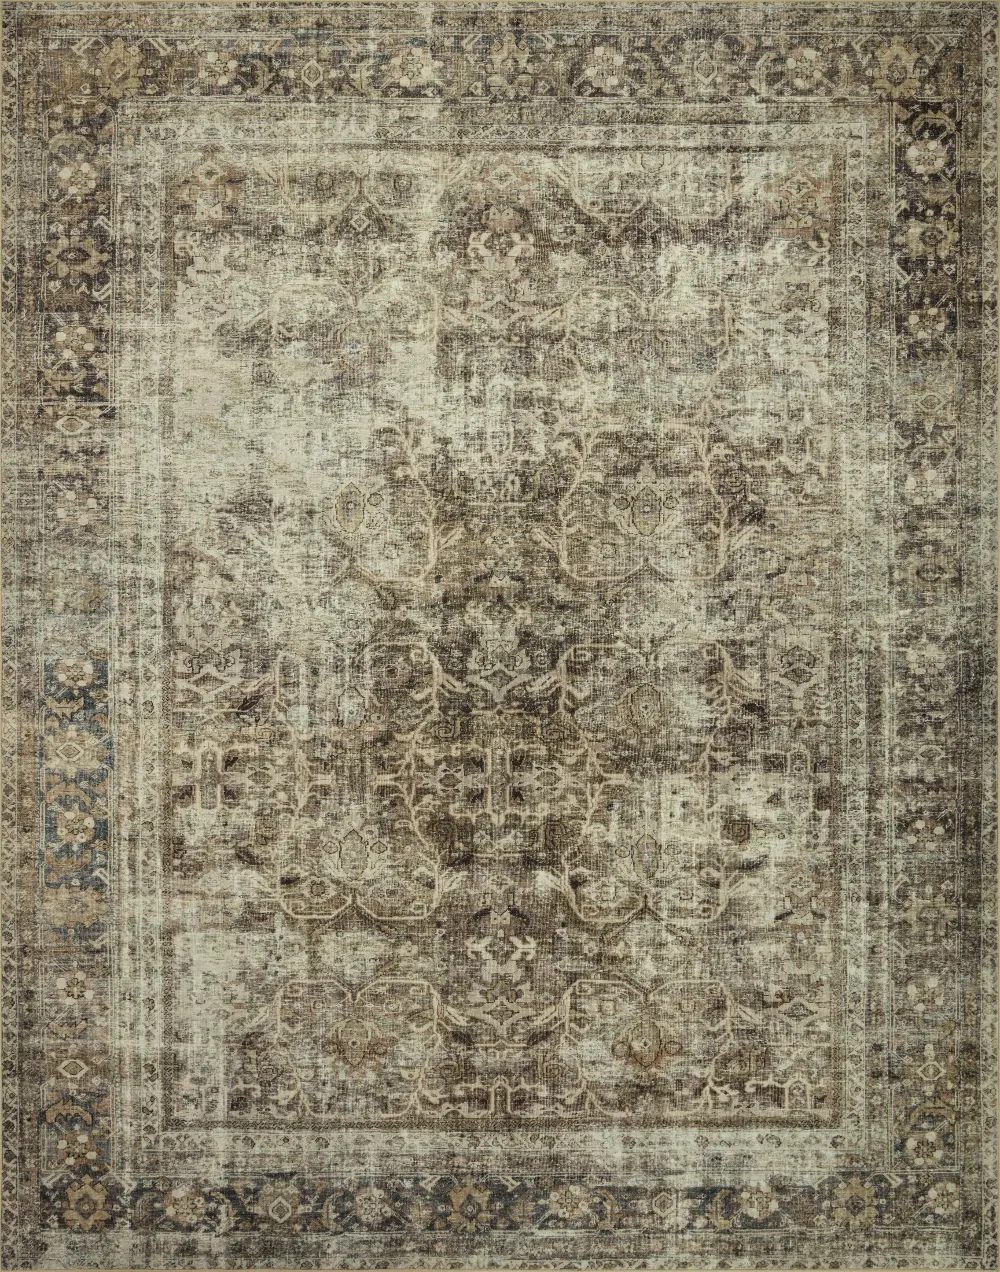 SIN-O1MHPEBT8.6X11.6 Sinclair 9 x 12 Antique Pebble Taupe Area Rug-1